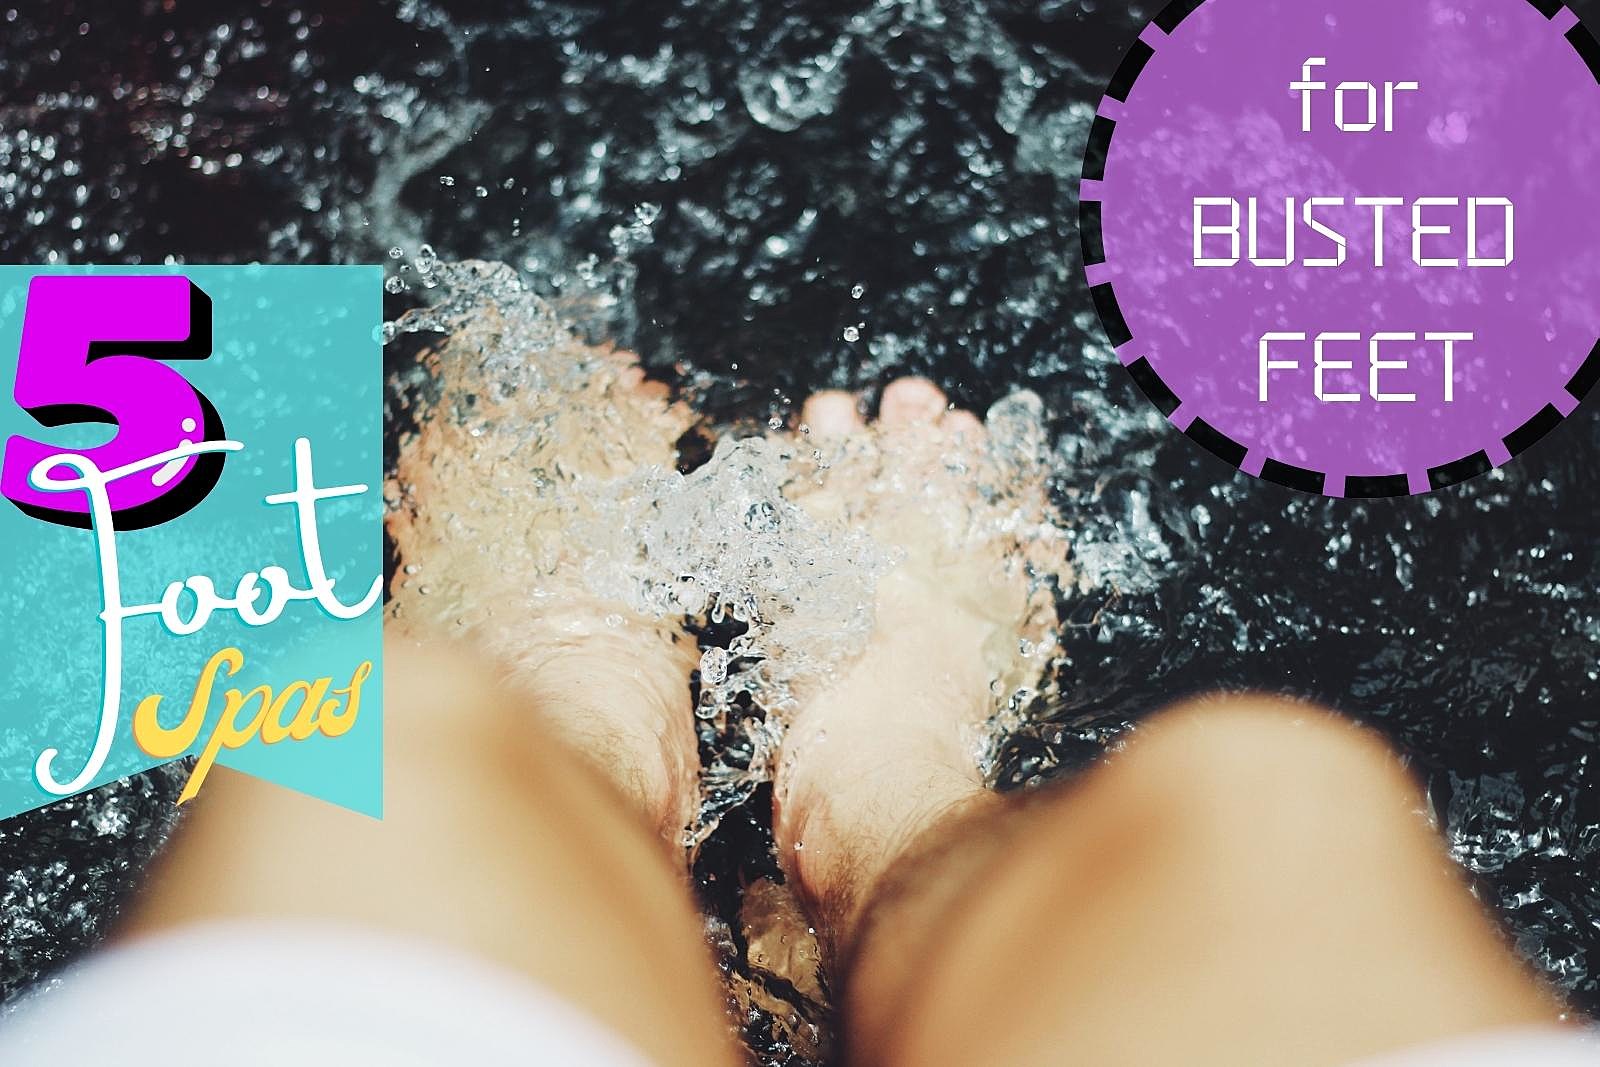 Busted Feet? Try One of These Top 5 Foot Spas in Yakima